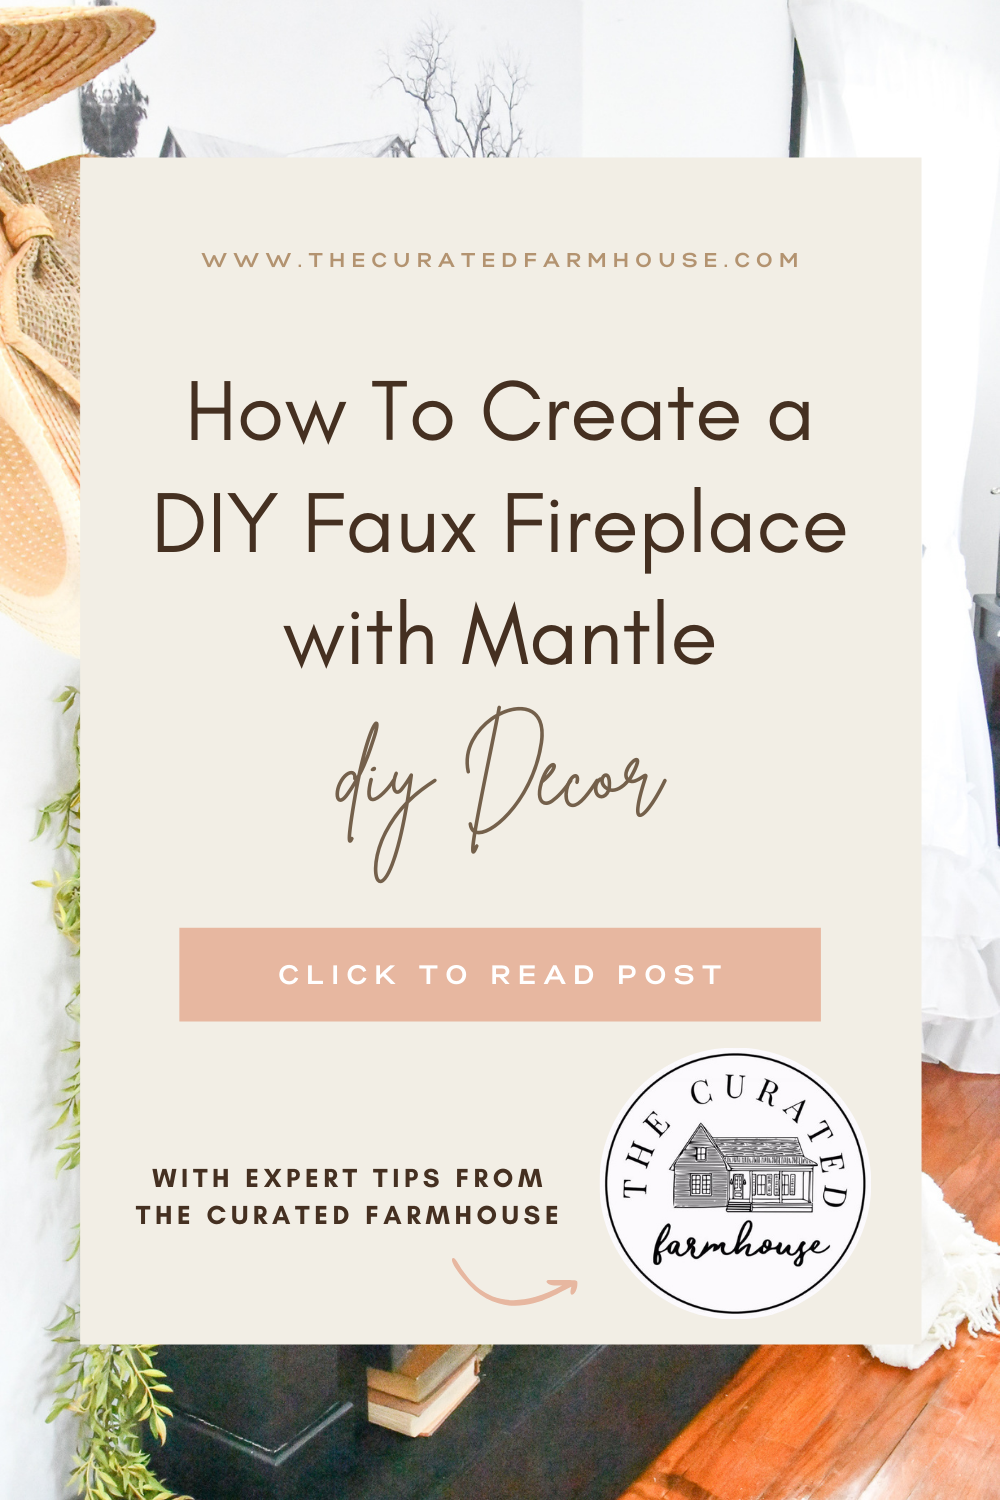 How To Create a DIY Faux Fireplace with Mantle